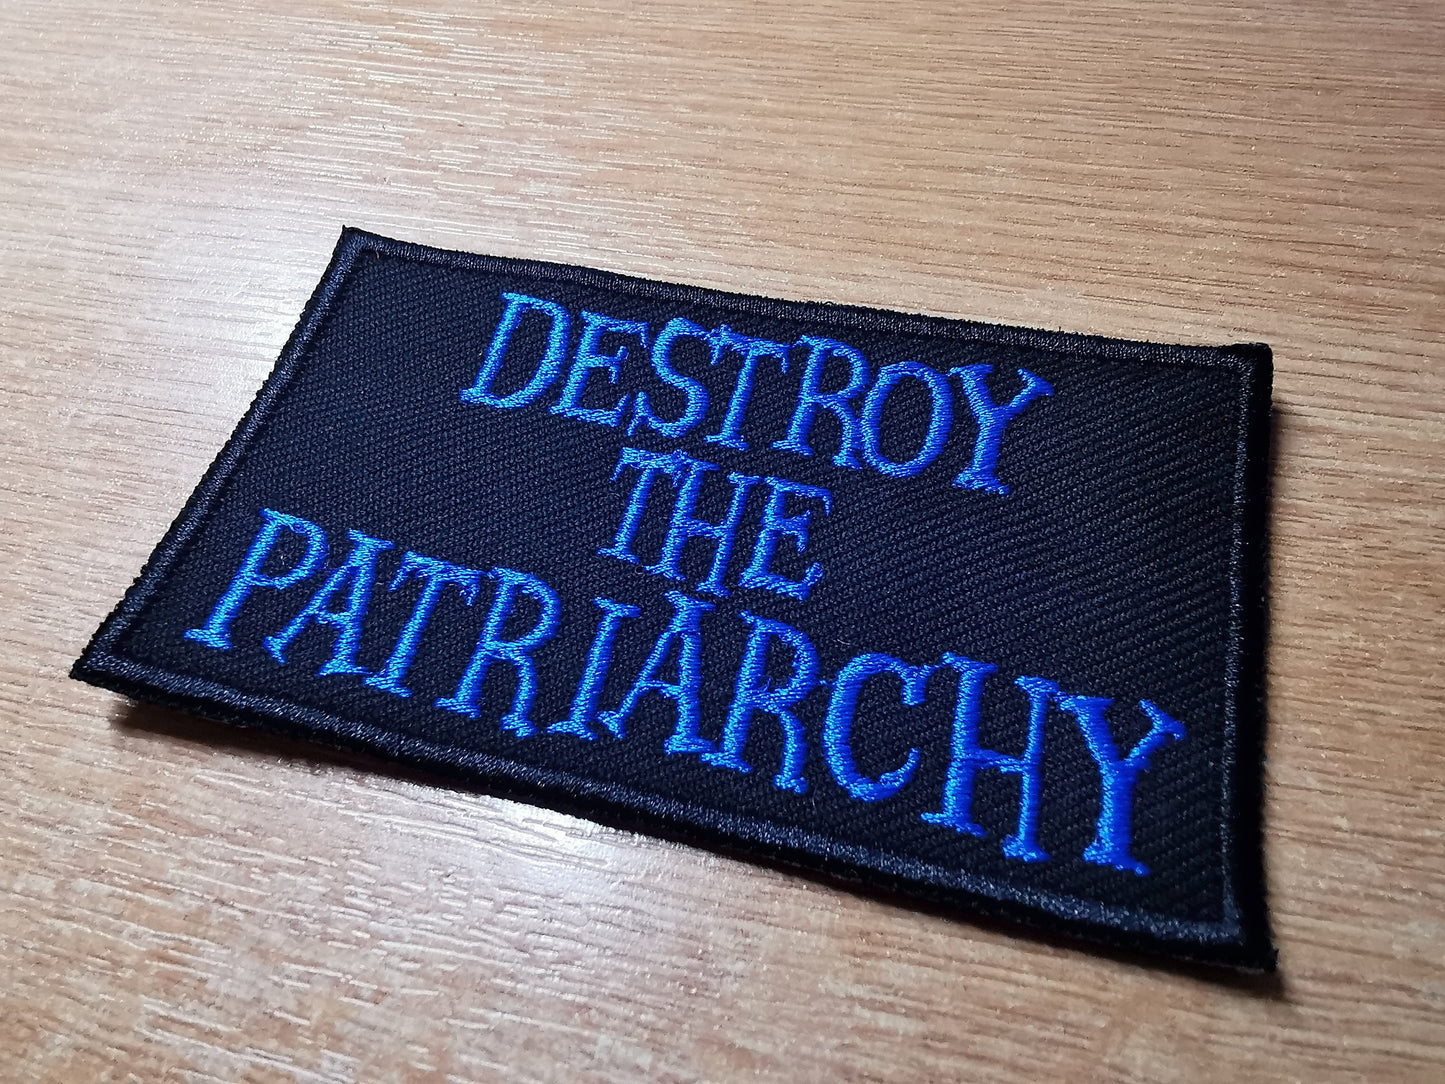 Destroy the Patriarchy Iron On Embroidered Patch Feminist and Feminism anti-misogyny Protest patches and appliques